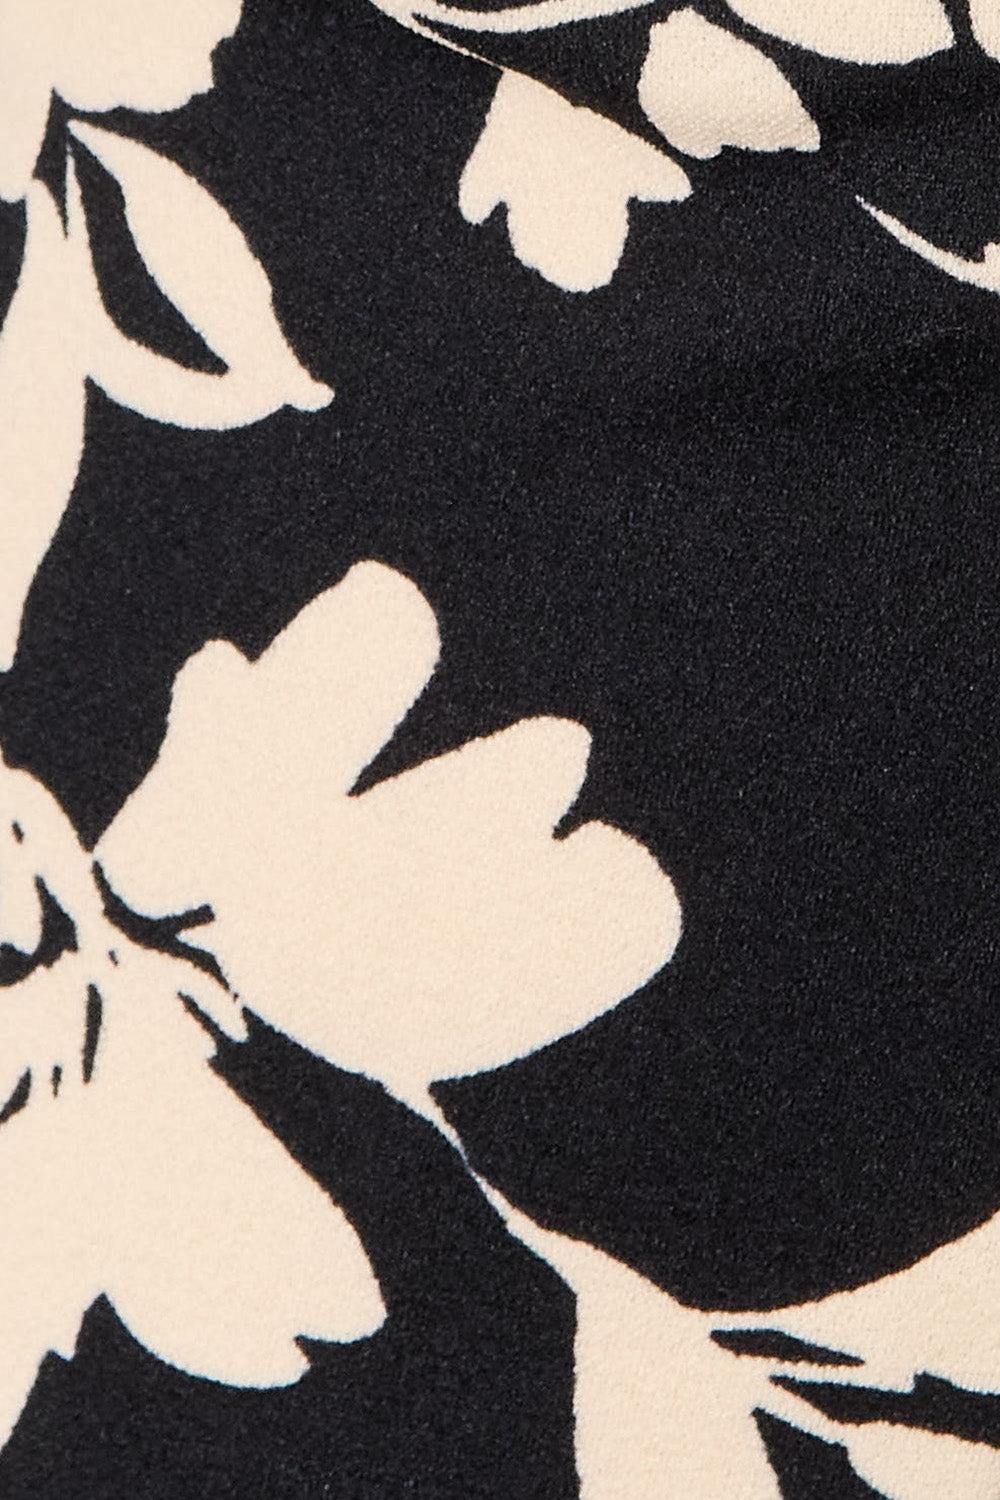 a close up of a black and white flowered shirt